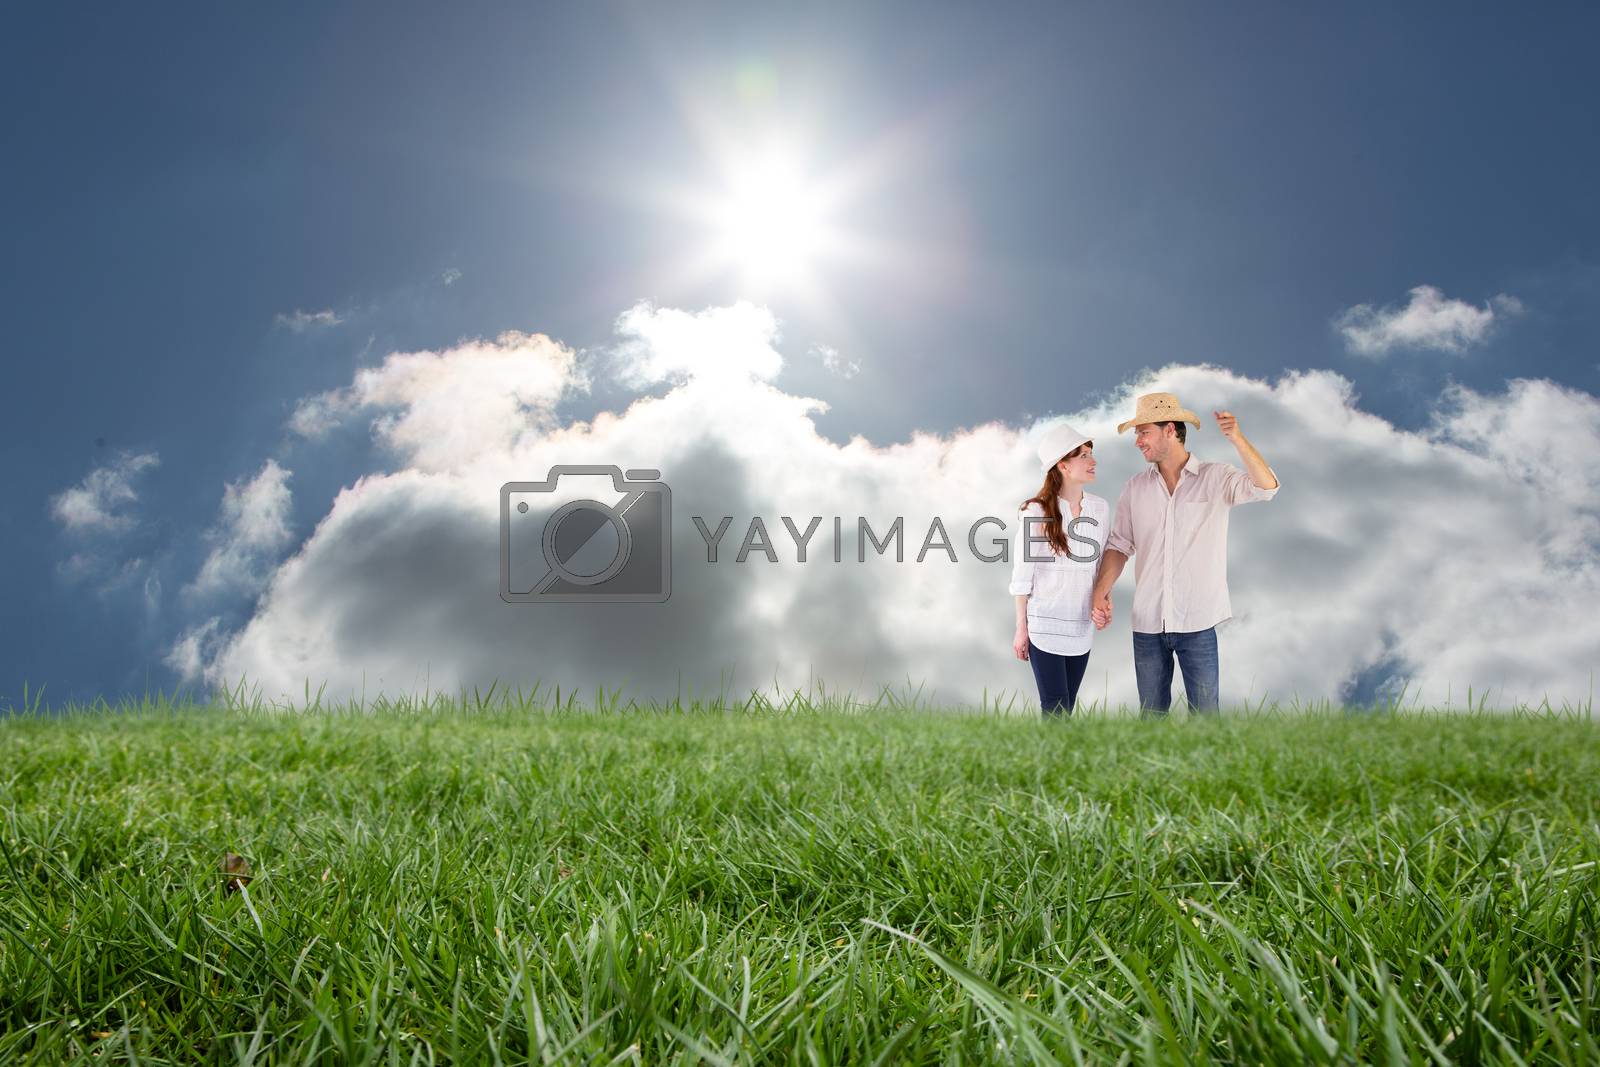 Royalty free image of Composite image of smiling couple both wearing hats by Wavebreakmedia